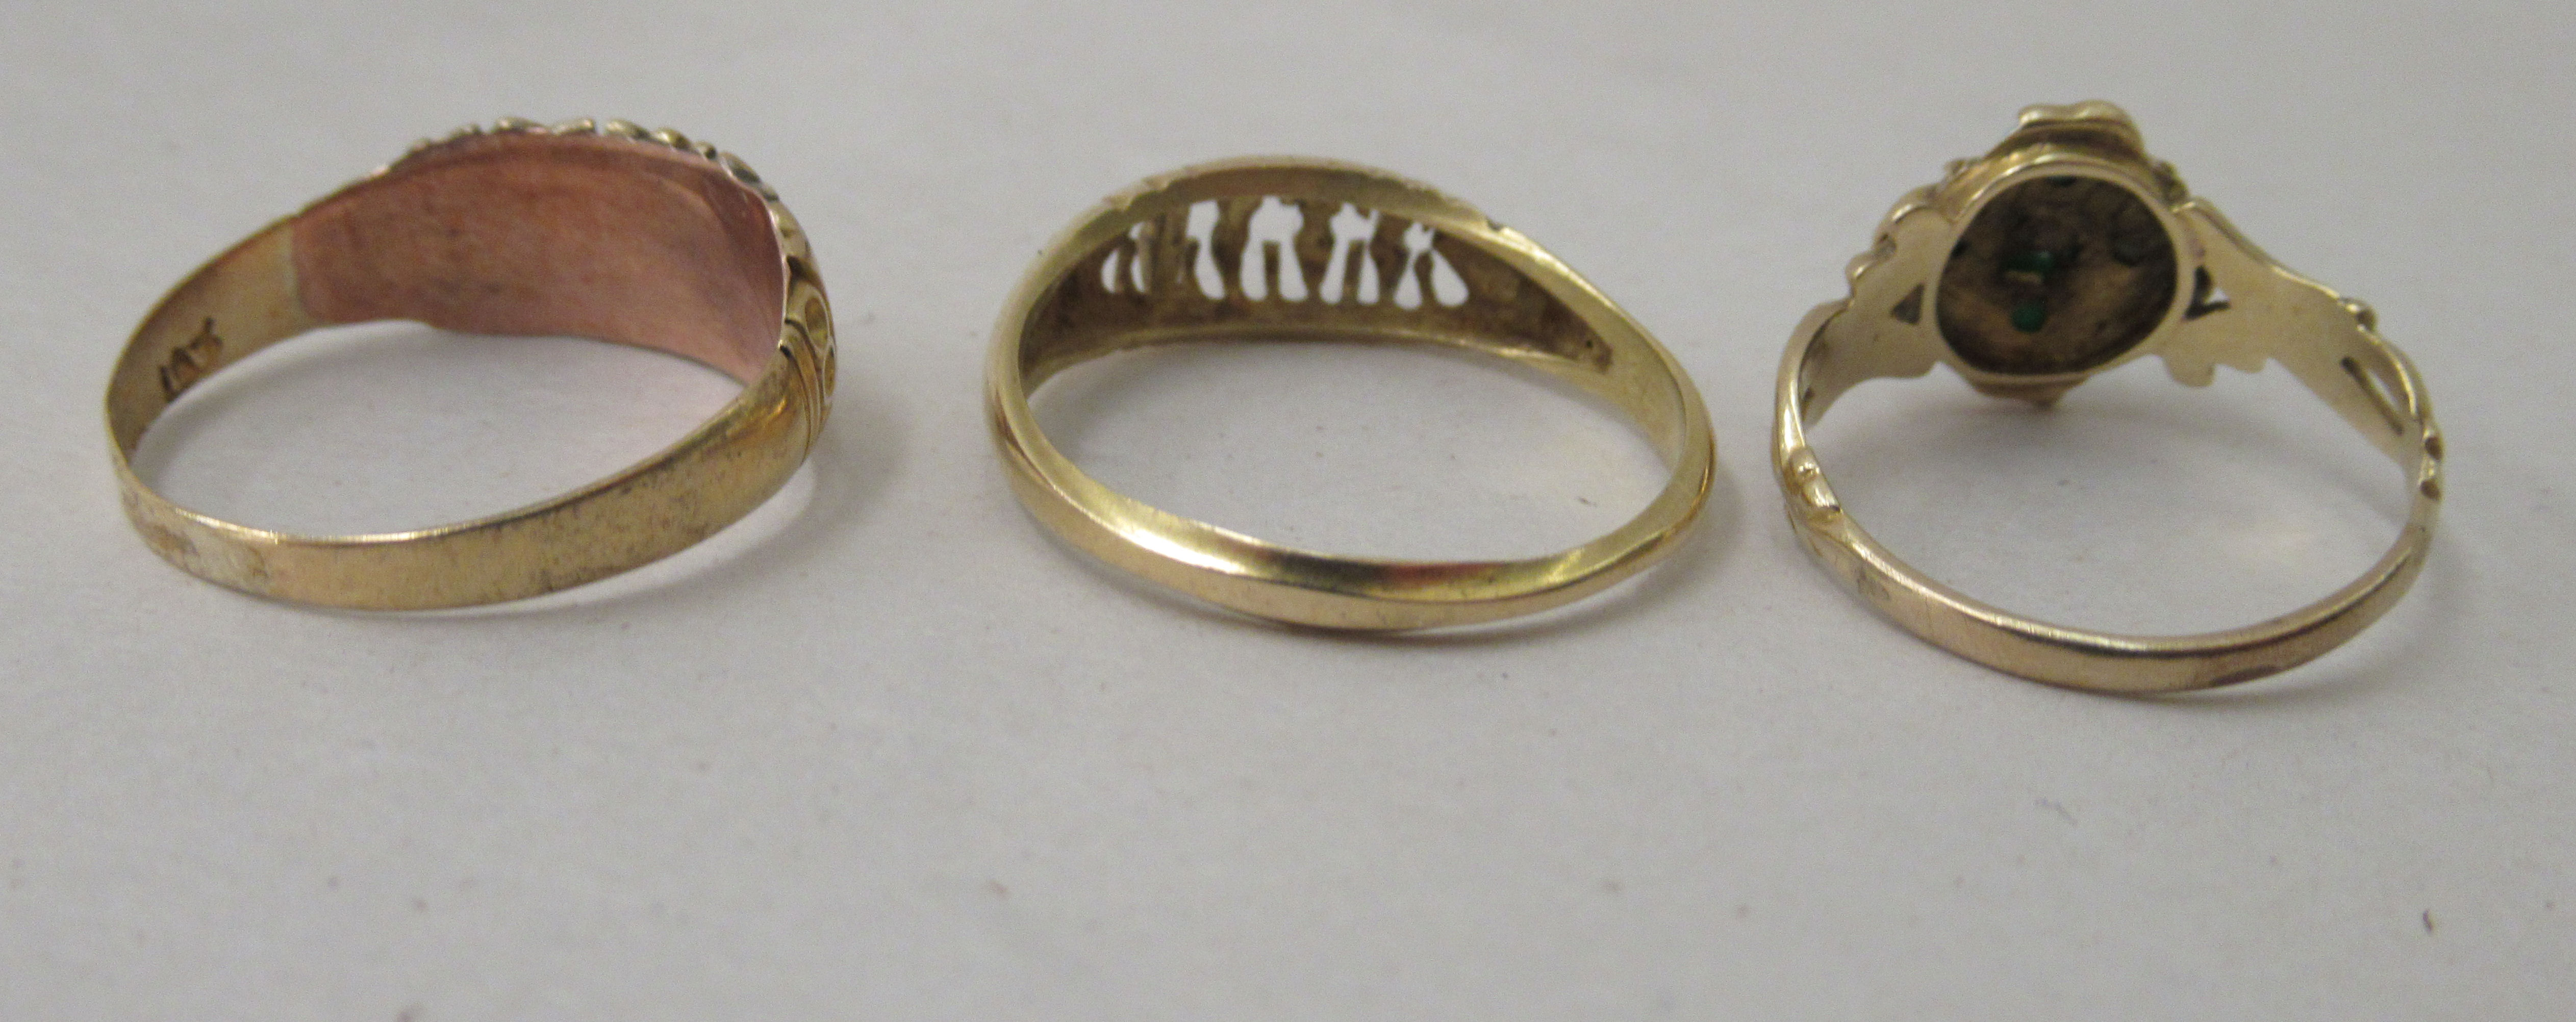 Three gold coloured rings, one set with turquoise beads - Image 2 of 2